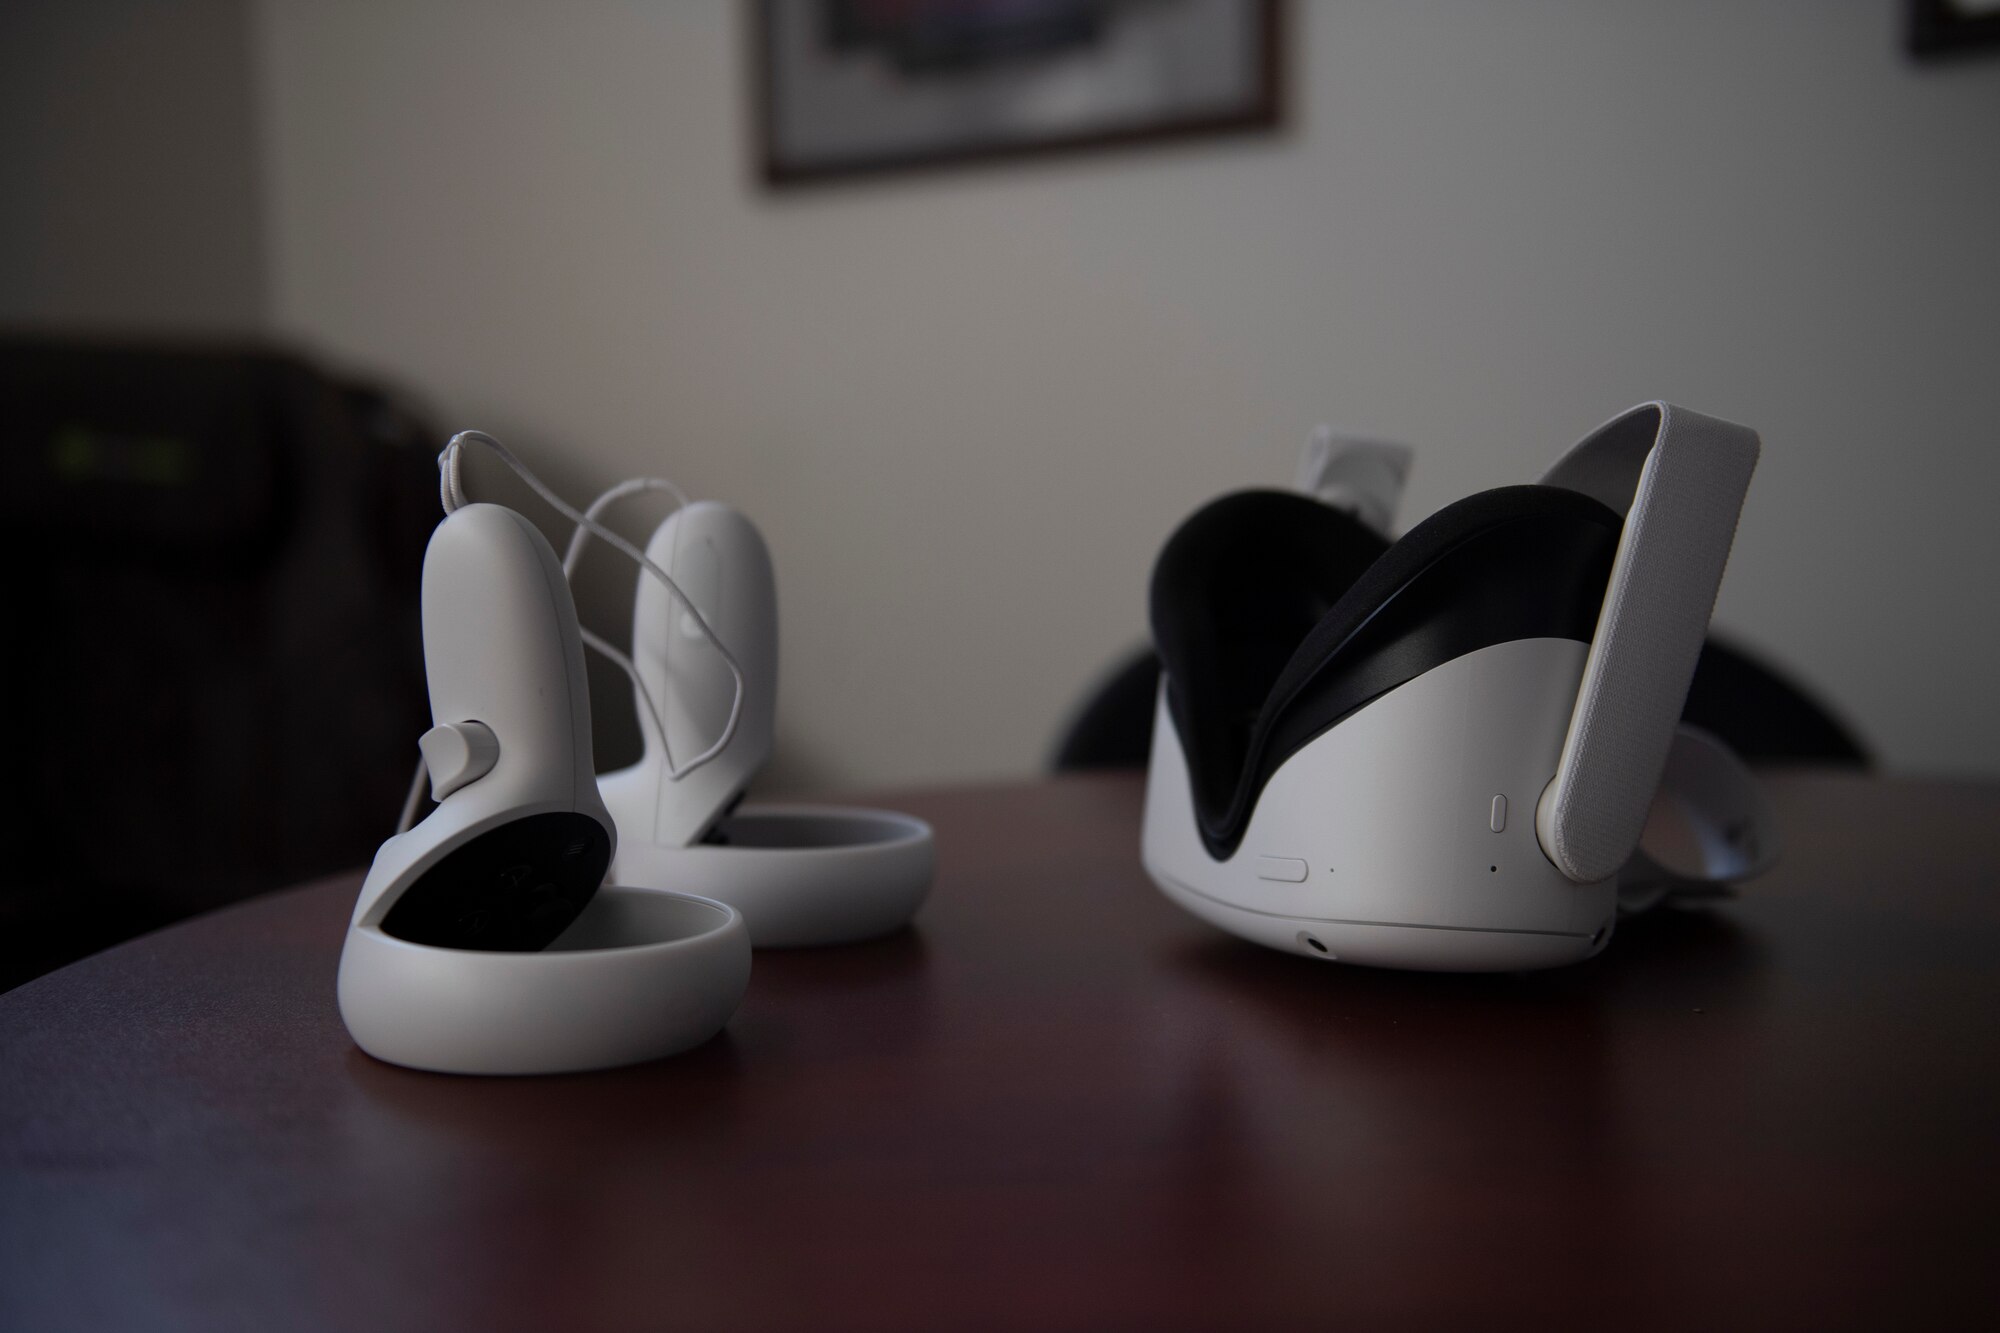 A photo of a VR headset sitting on a table.